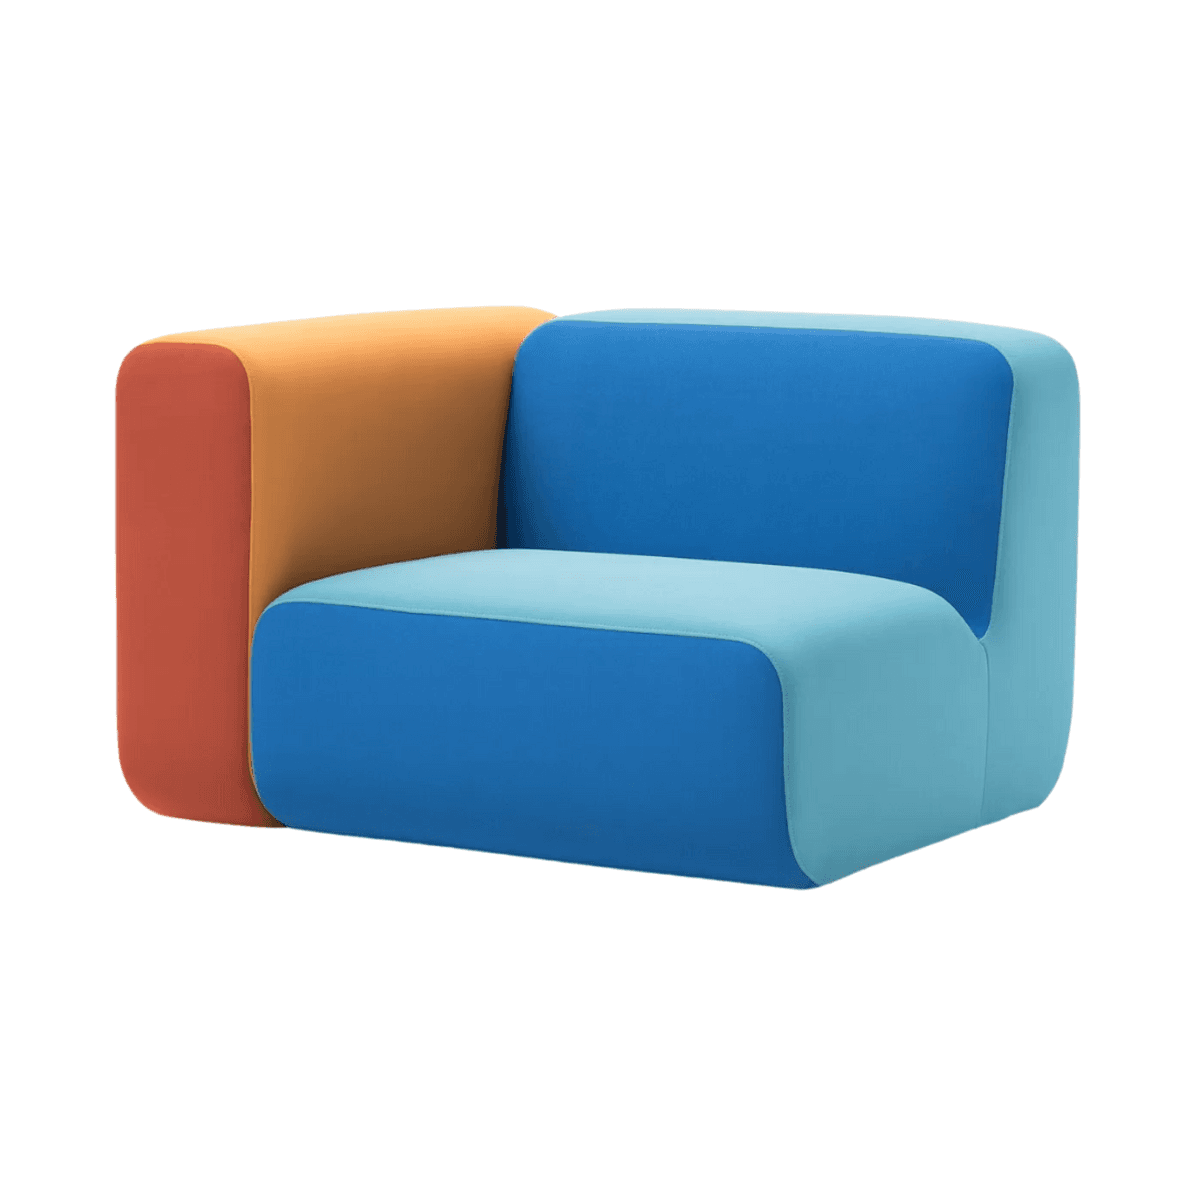 Zuri modular sofa - Inside Out Contracts